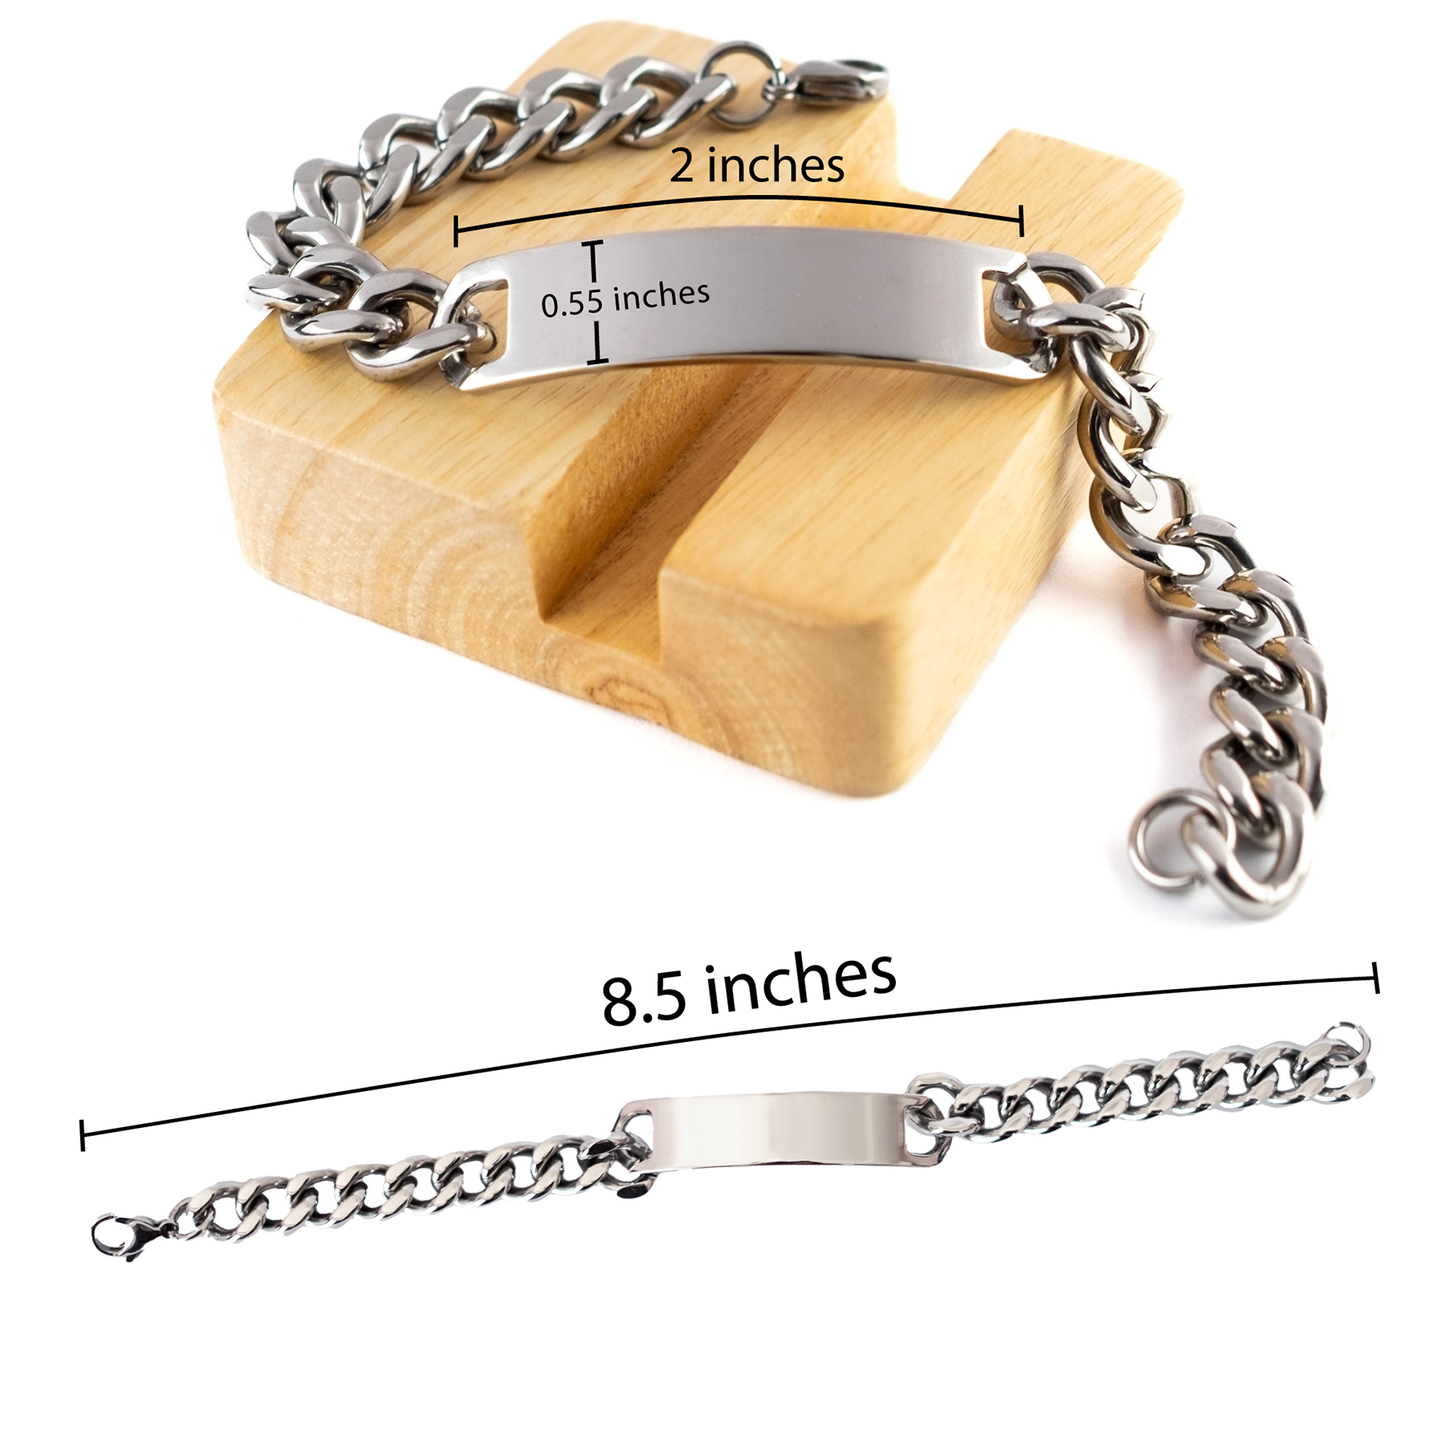 To My Stepmom Thank You Gifts, You are appreciated more than you know, Appreciation Cuban Chain Stainless Steel Bracelet for Stepmom, Birthday Unique Gifts for Stepmom